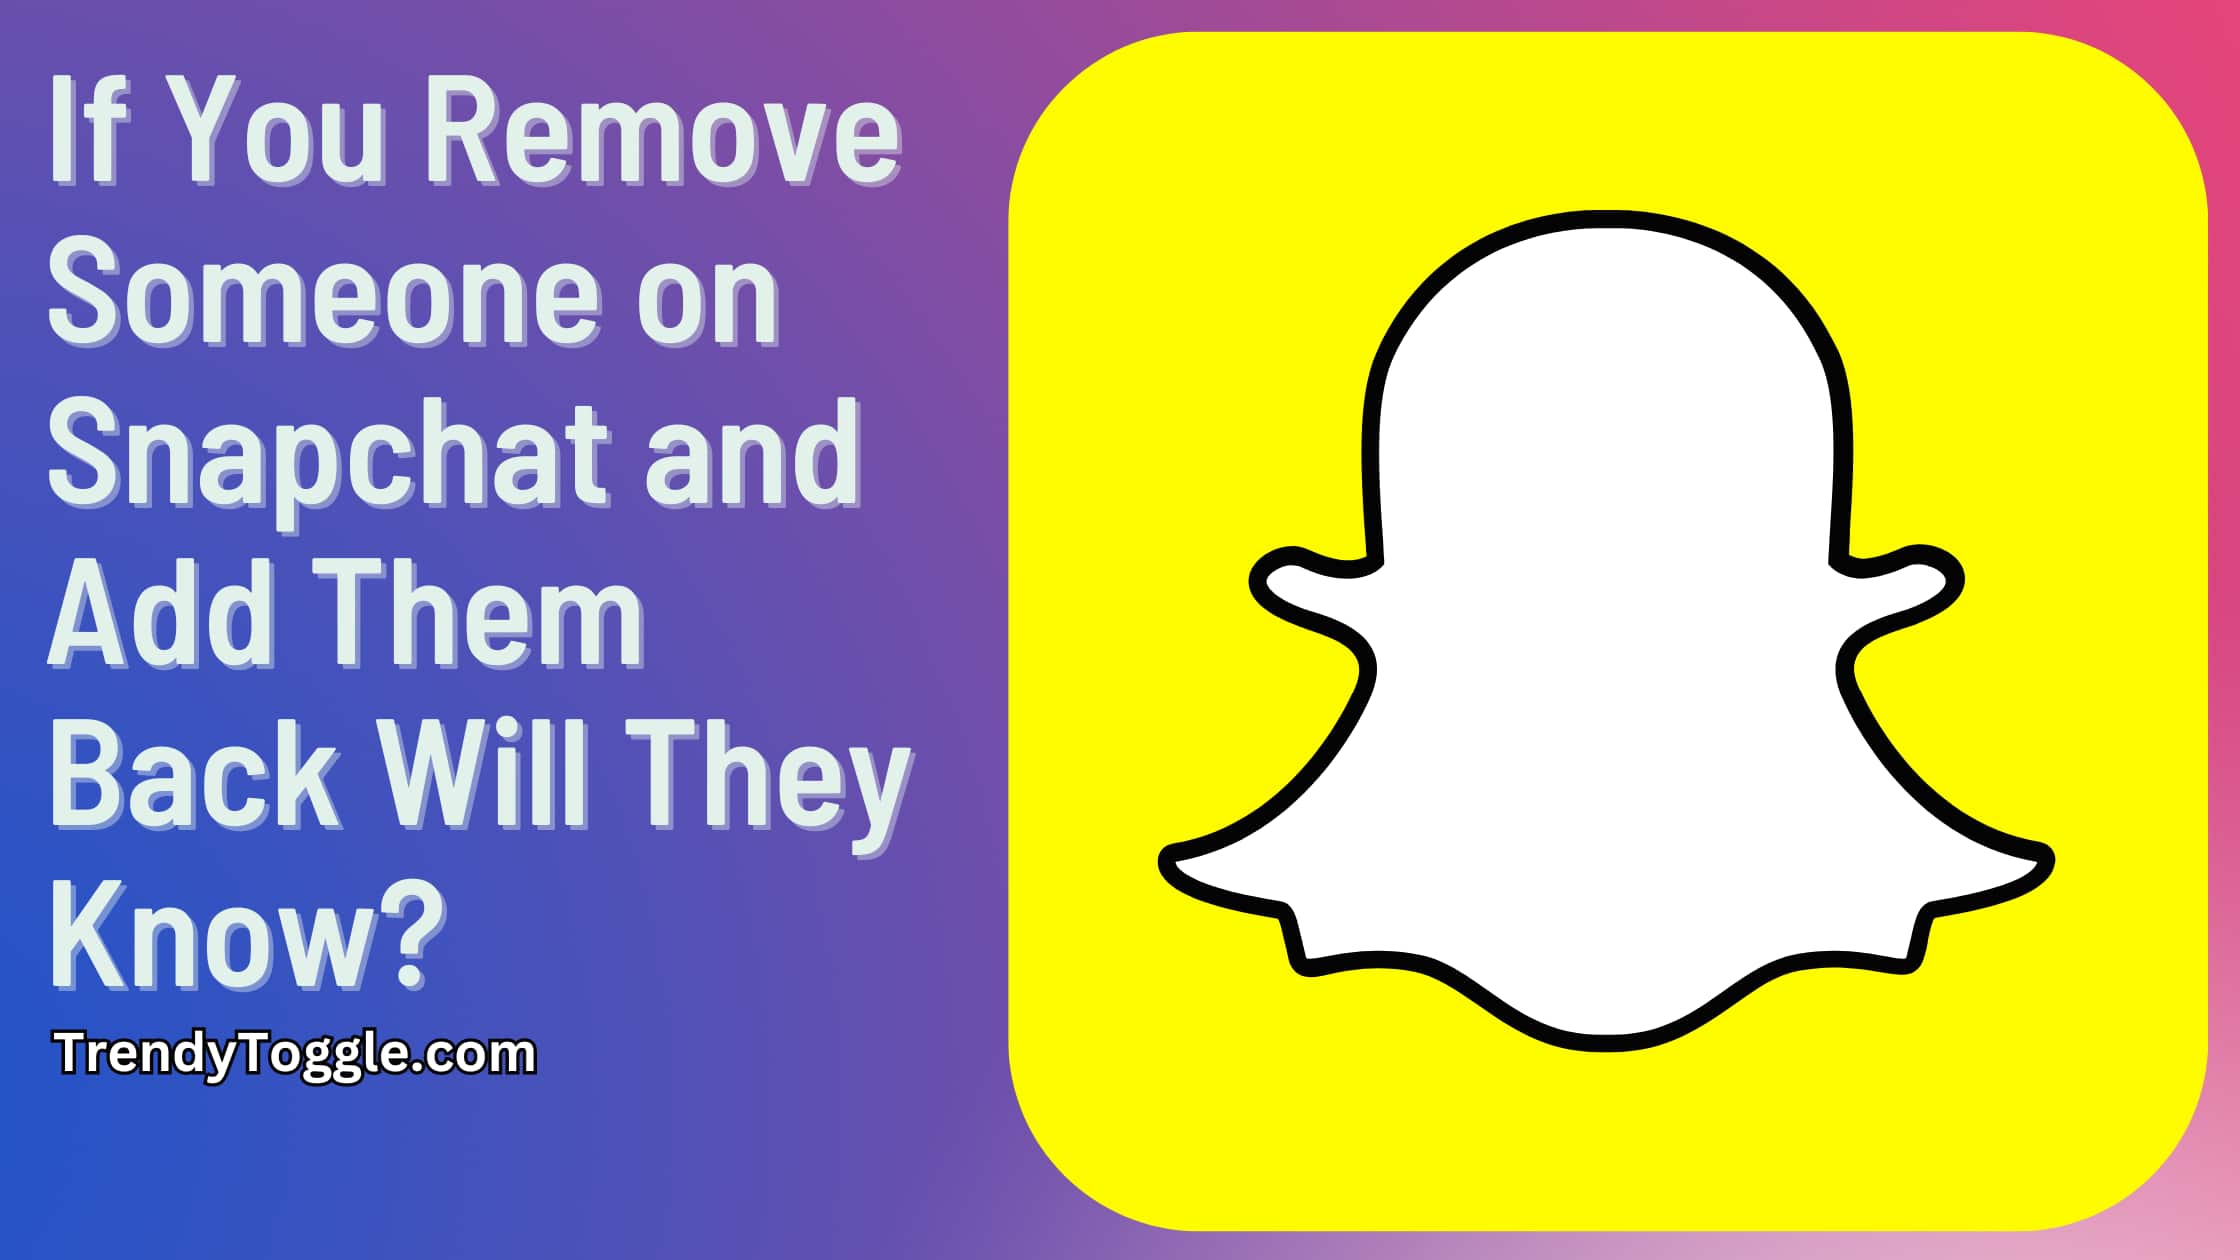 if you remove someone on snapchat and add them back will they know